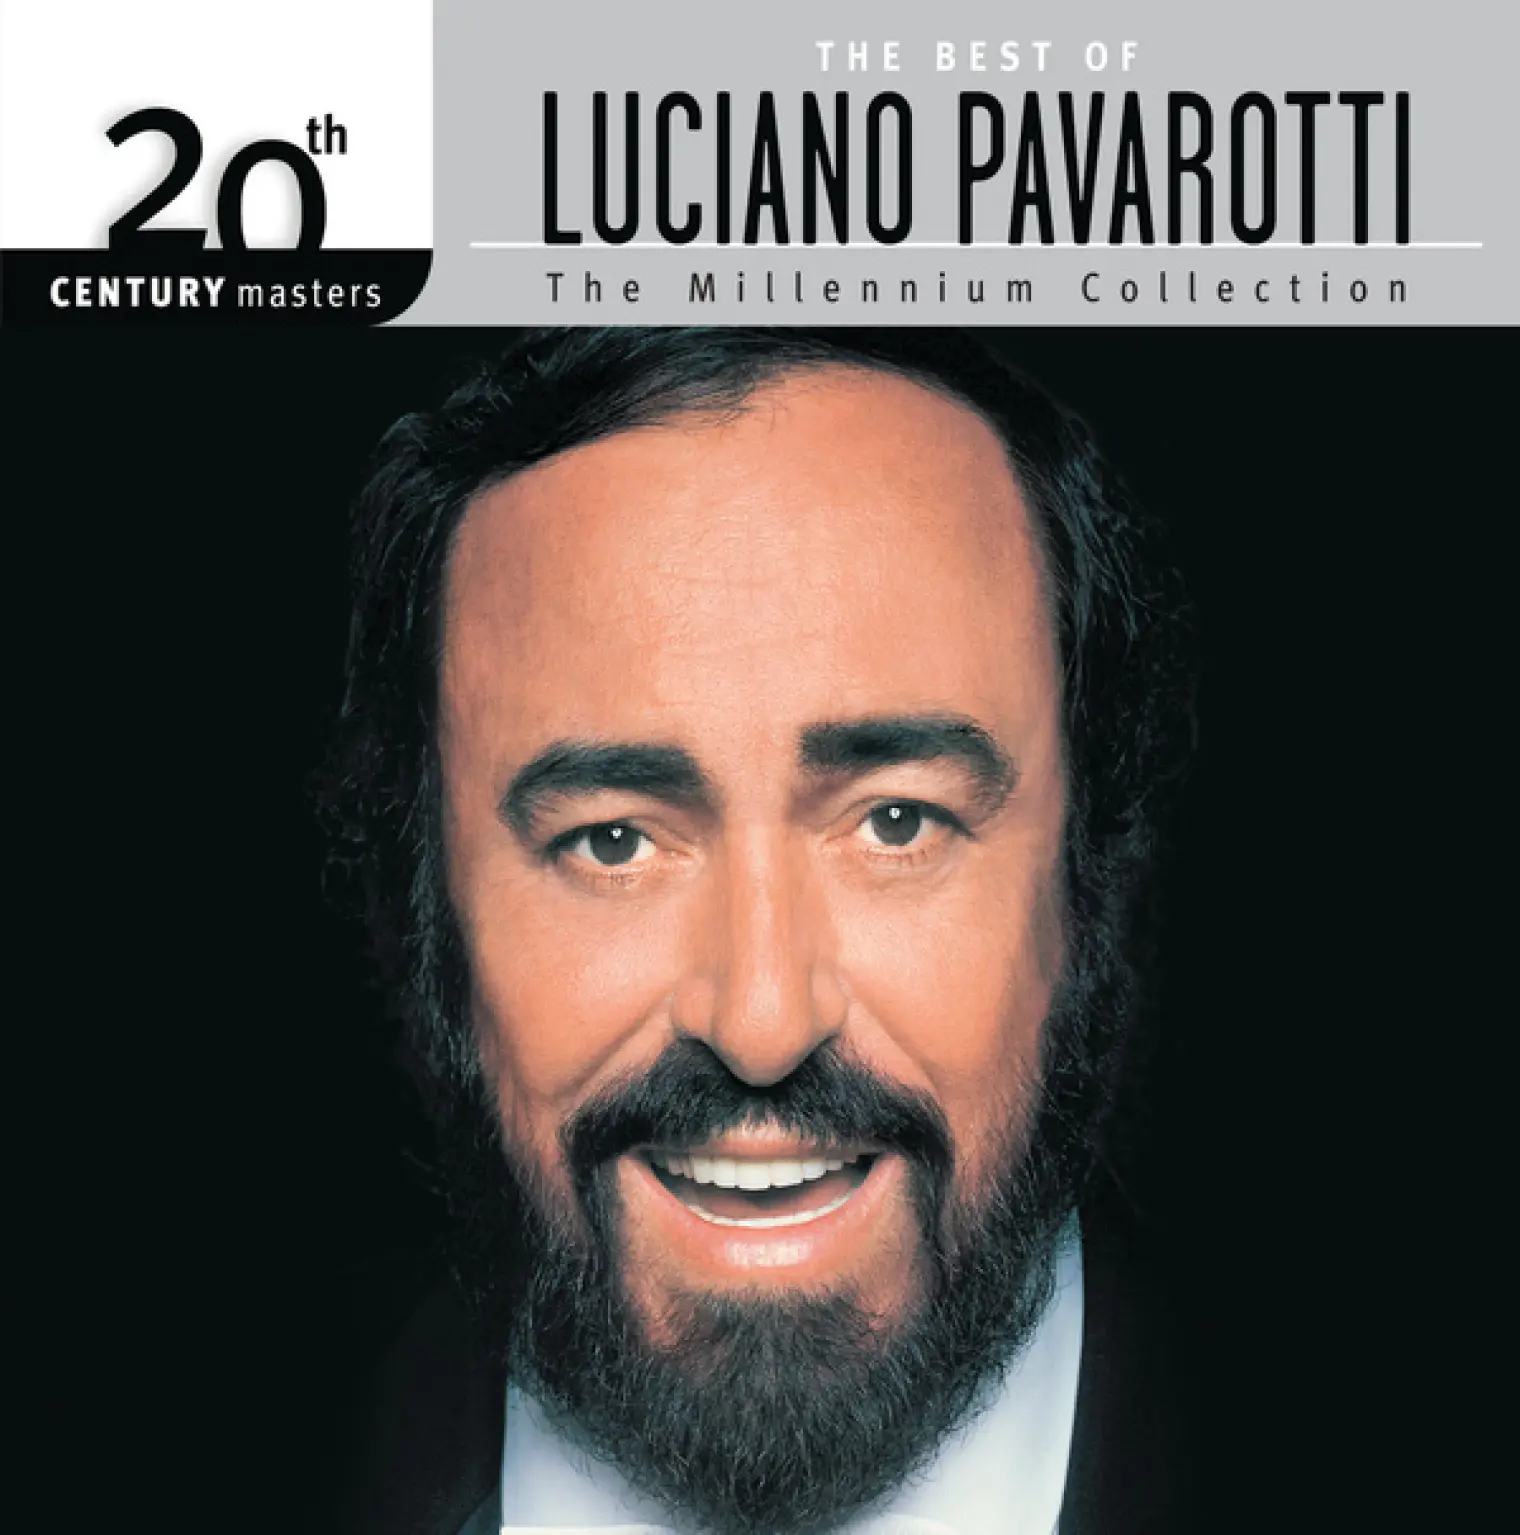 The Best Of Luciano Pavarotti 20th Century Masters The Millennium Collection -  Luciano Pavarotti 